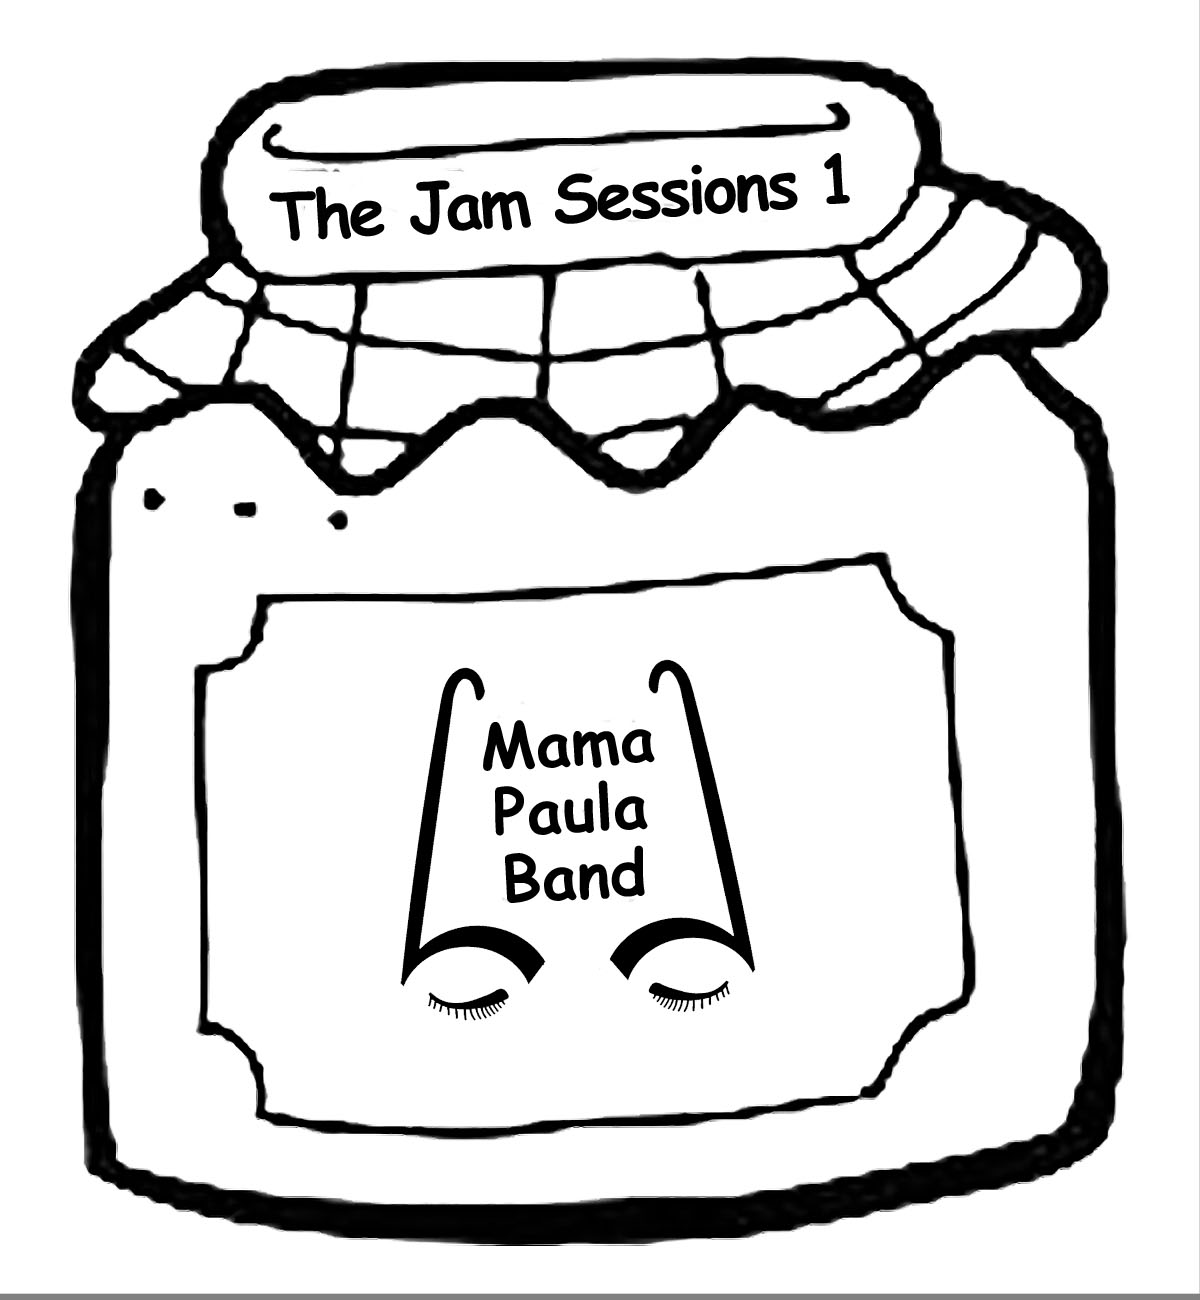 The Jam Sessions 1